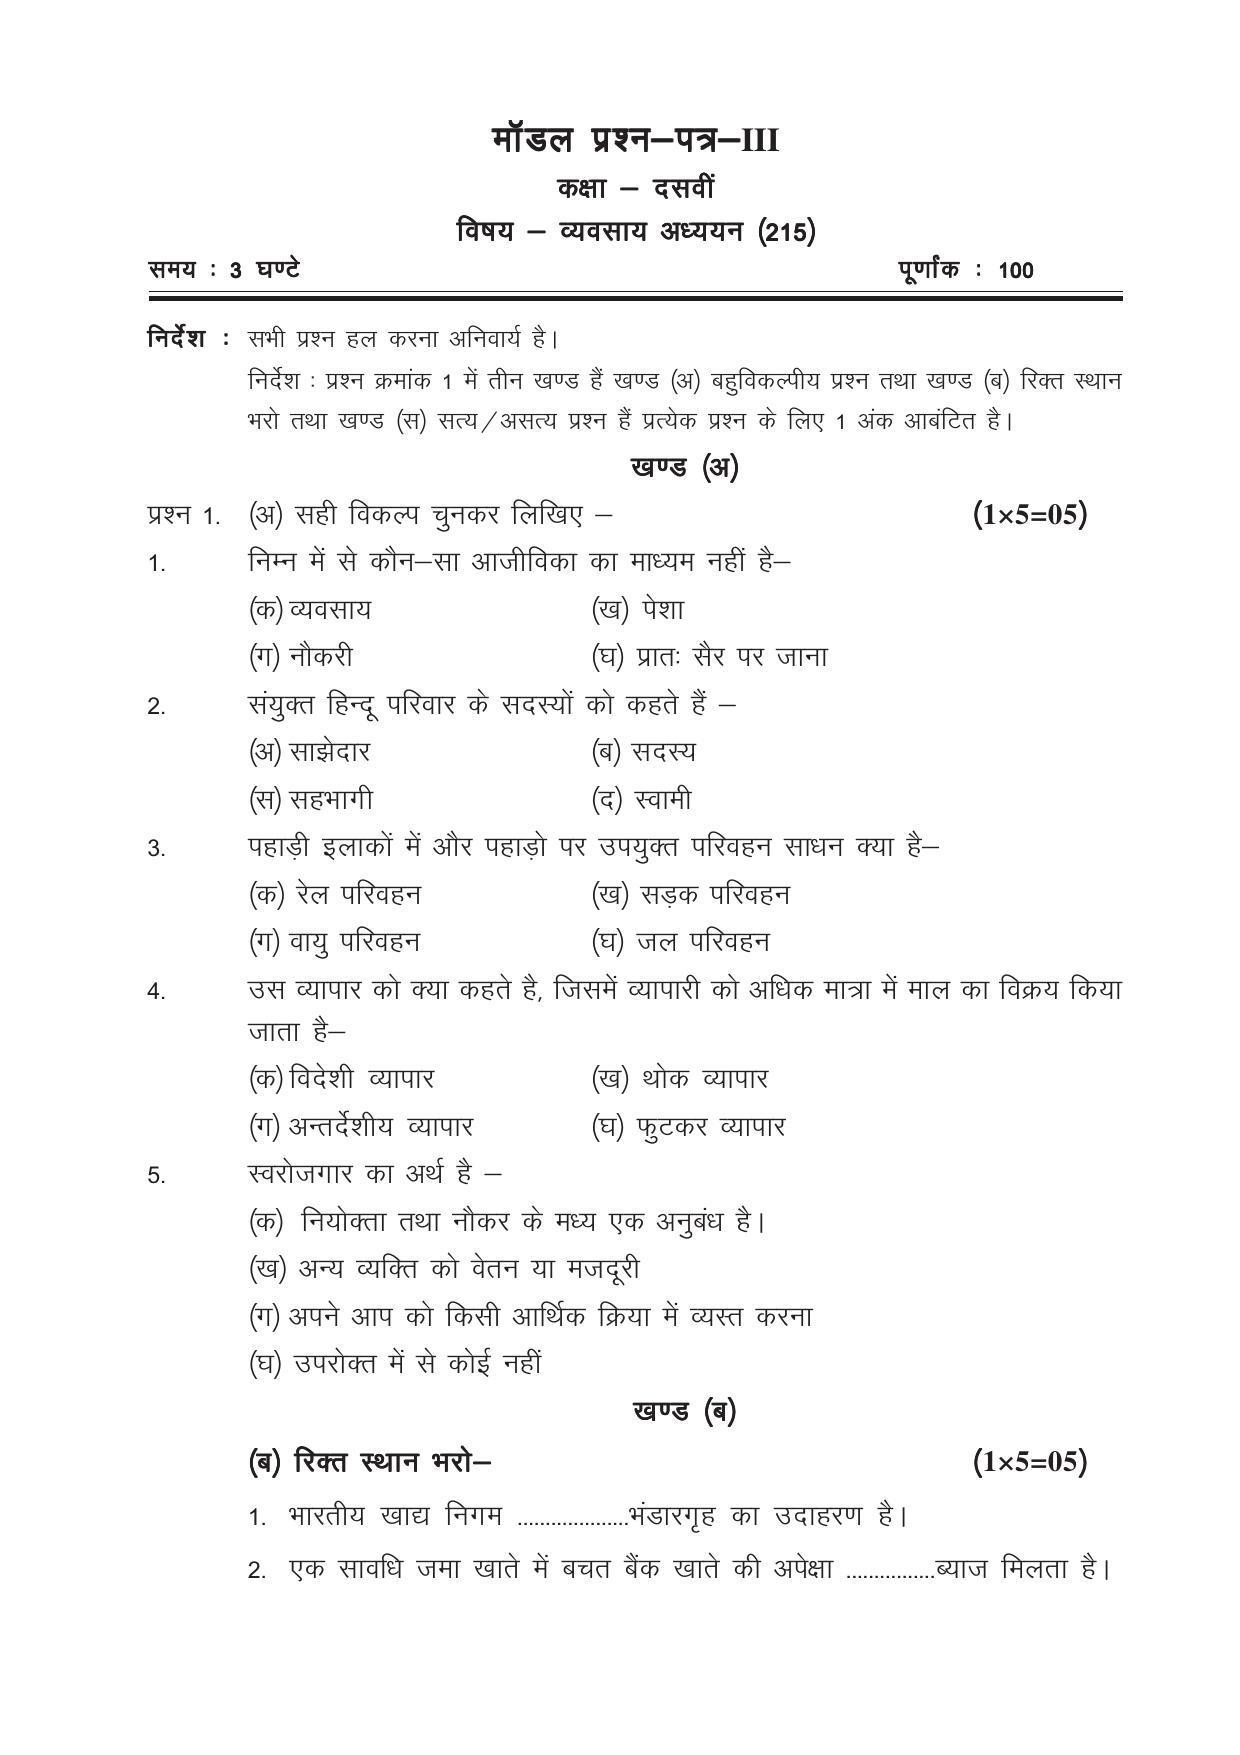 CGSOS Class 10th Model Question Paper - Business studies - III - Page 1